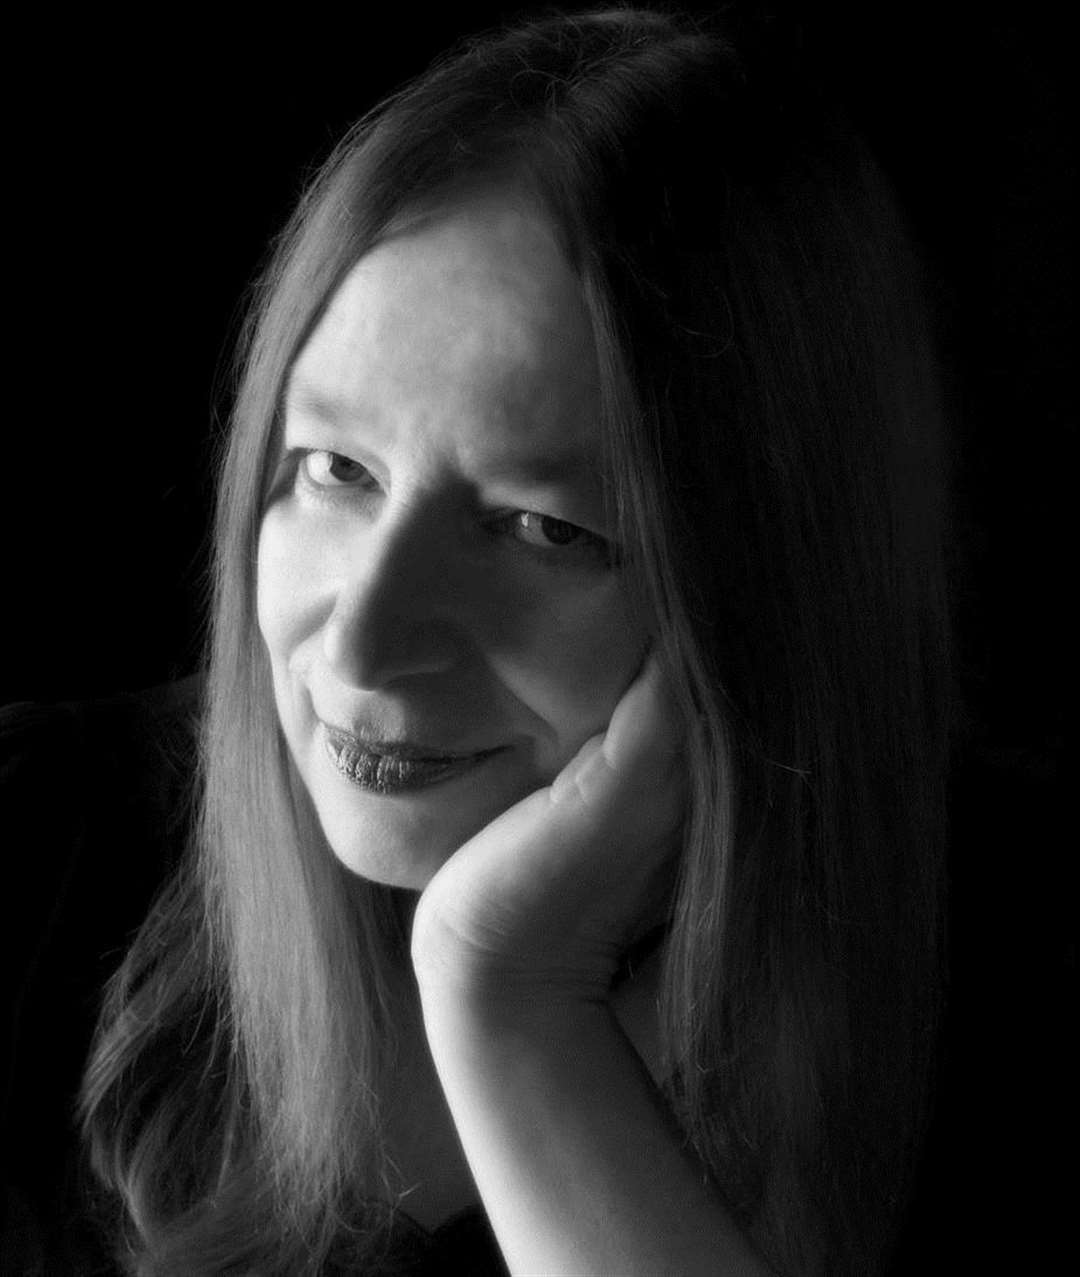 Author Alison Weir will be at Cranbrook